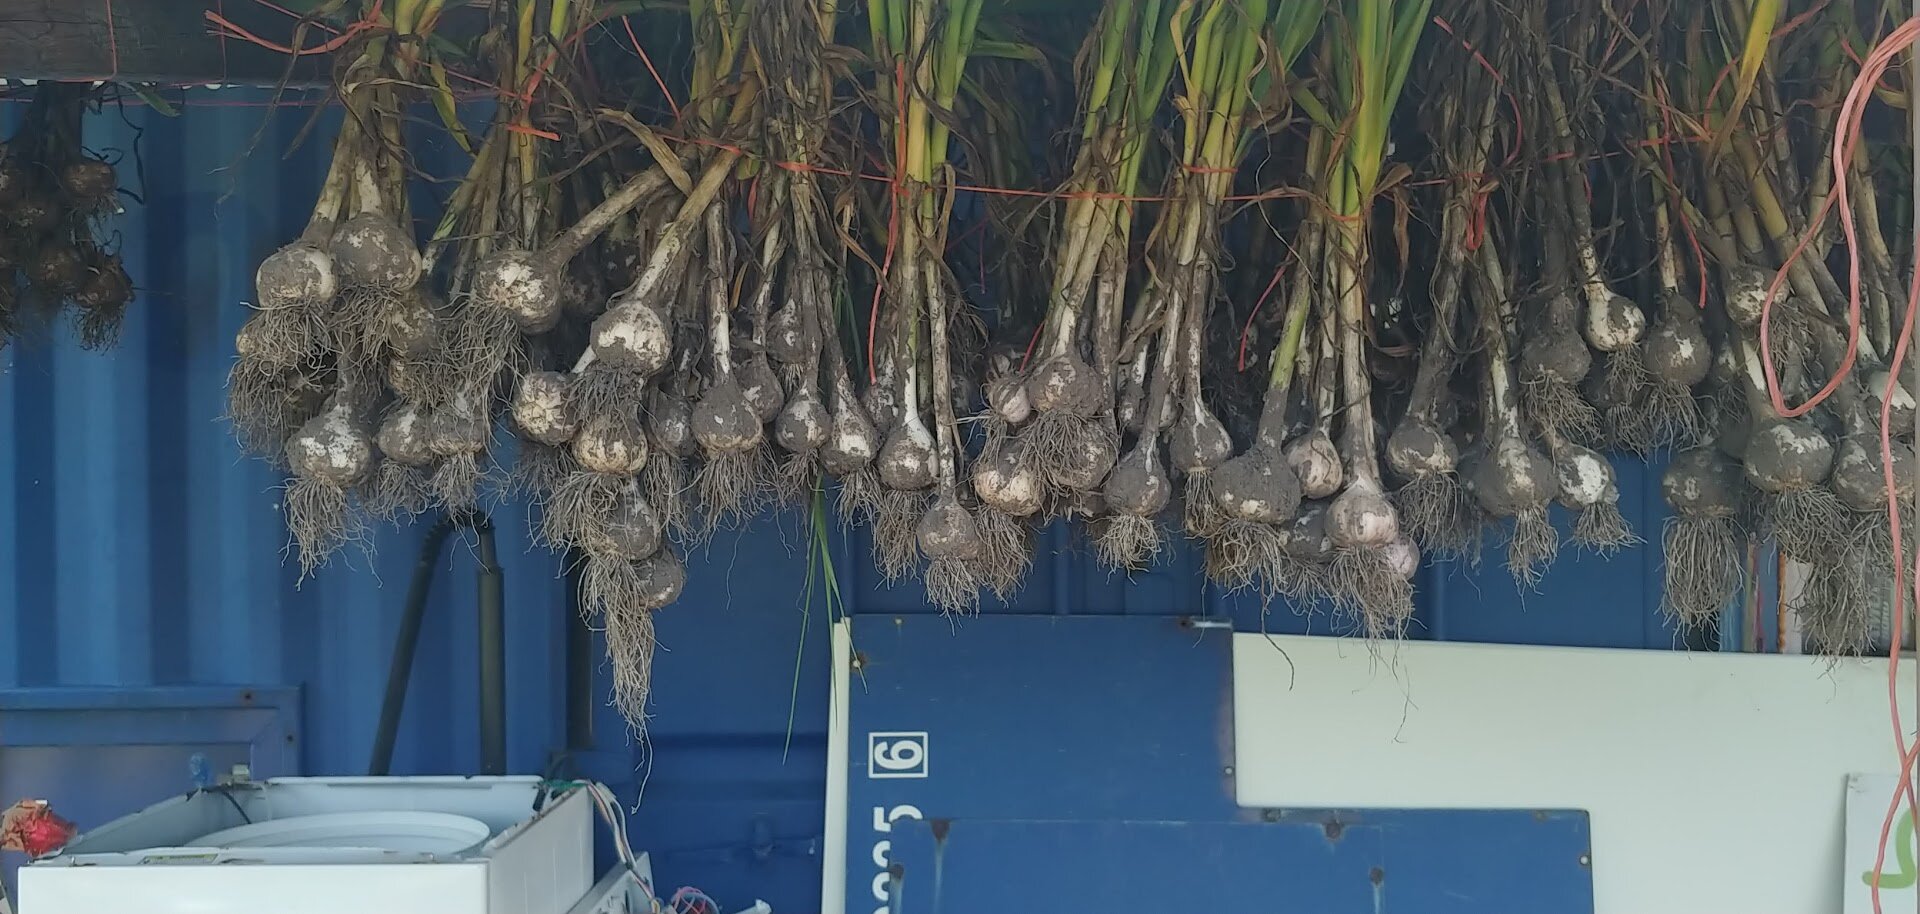  Garlic curing next to the market stand 